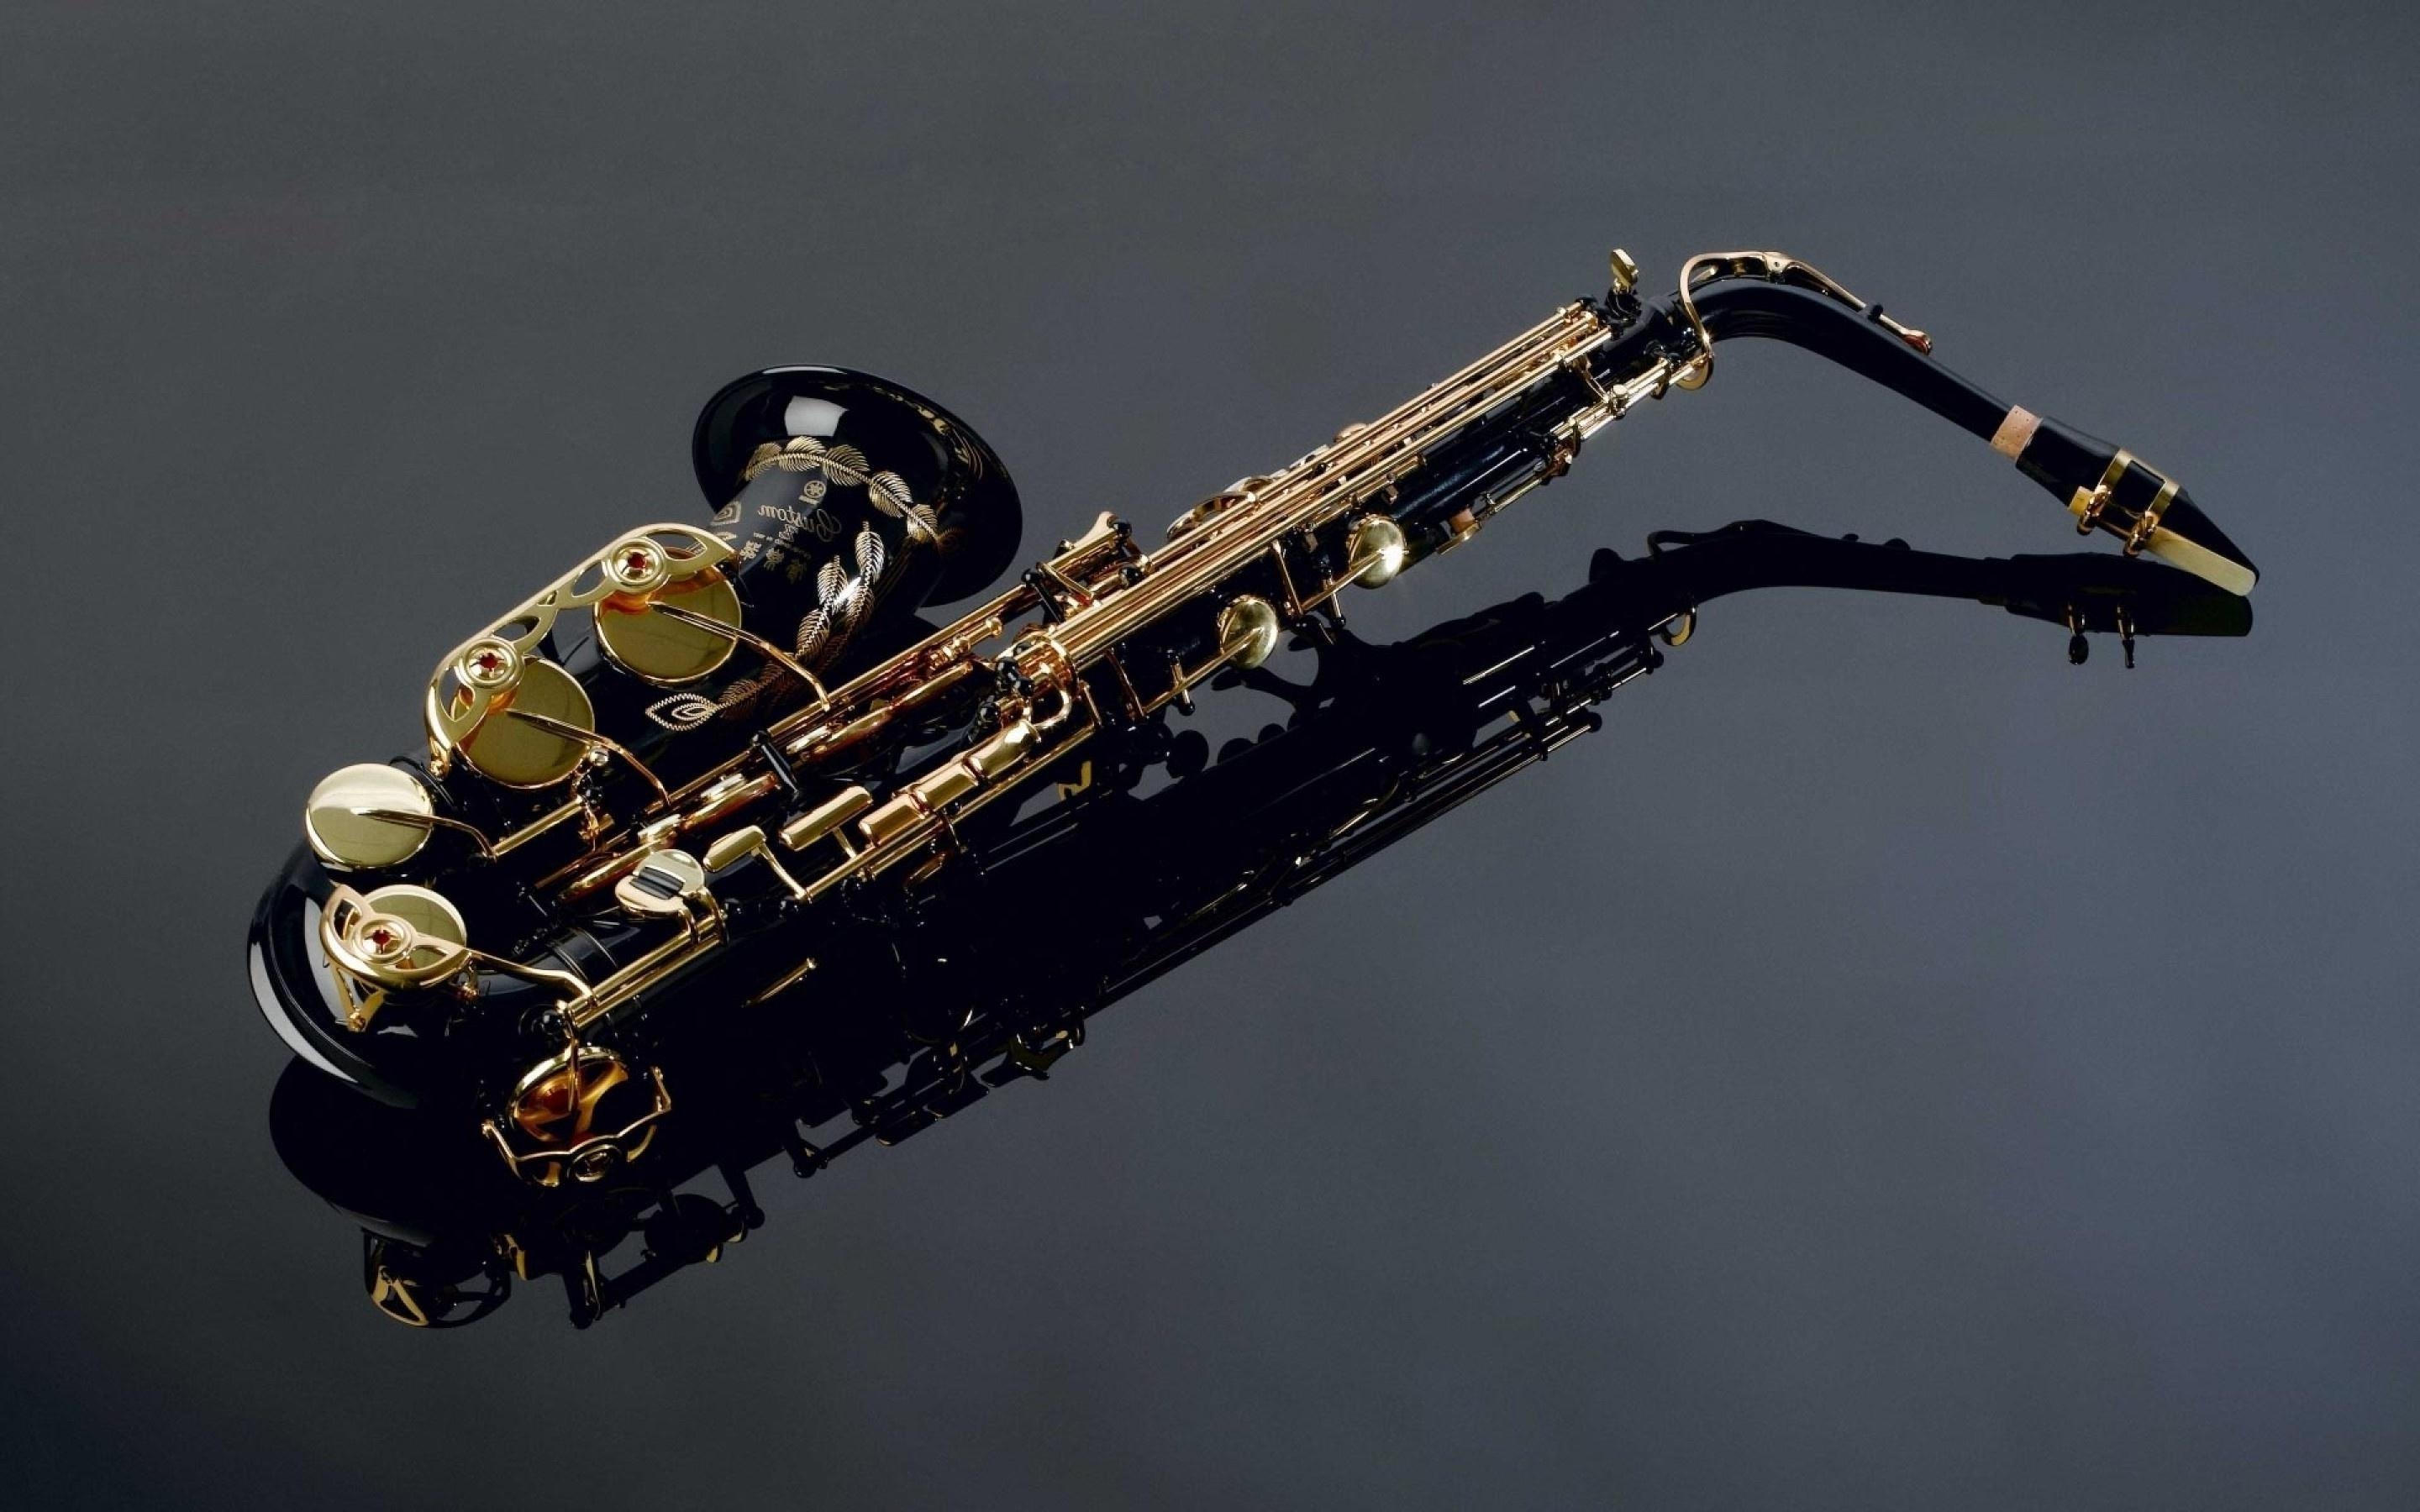 Saxophone: A brass instrument played by blowing into a mouthpiece and pressing keys to form musical notes. 2880x1800 HD Wallpaper.